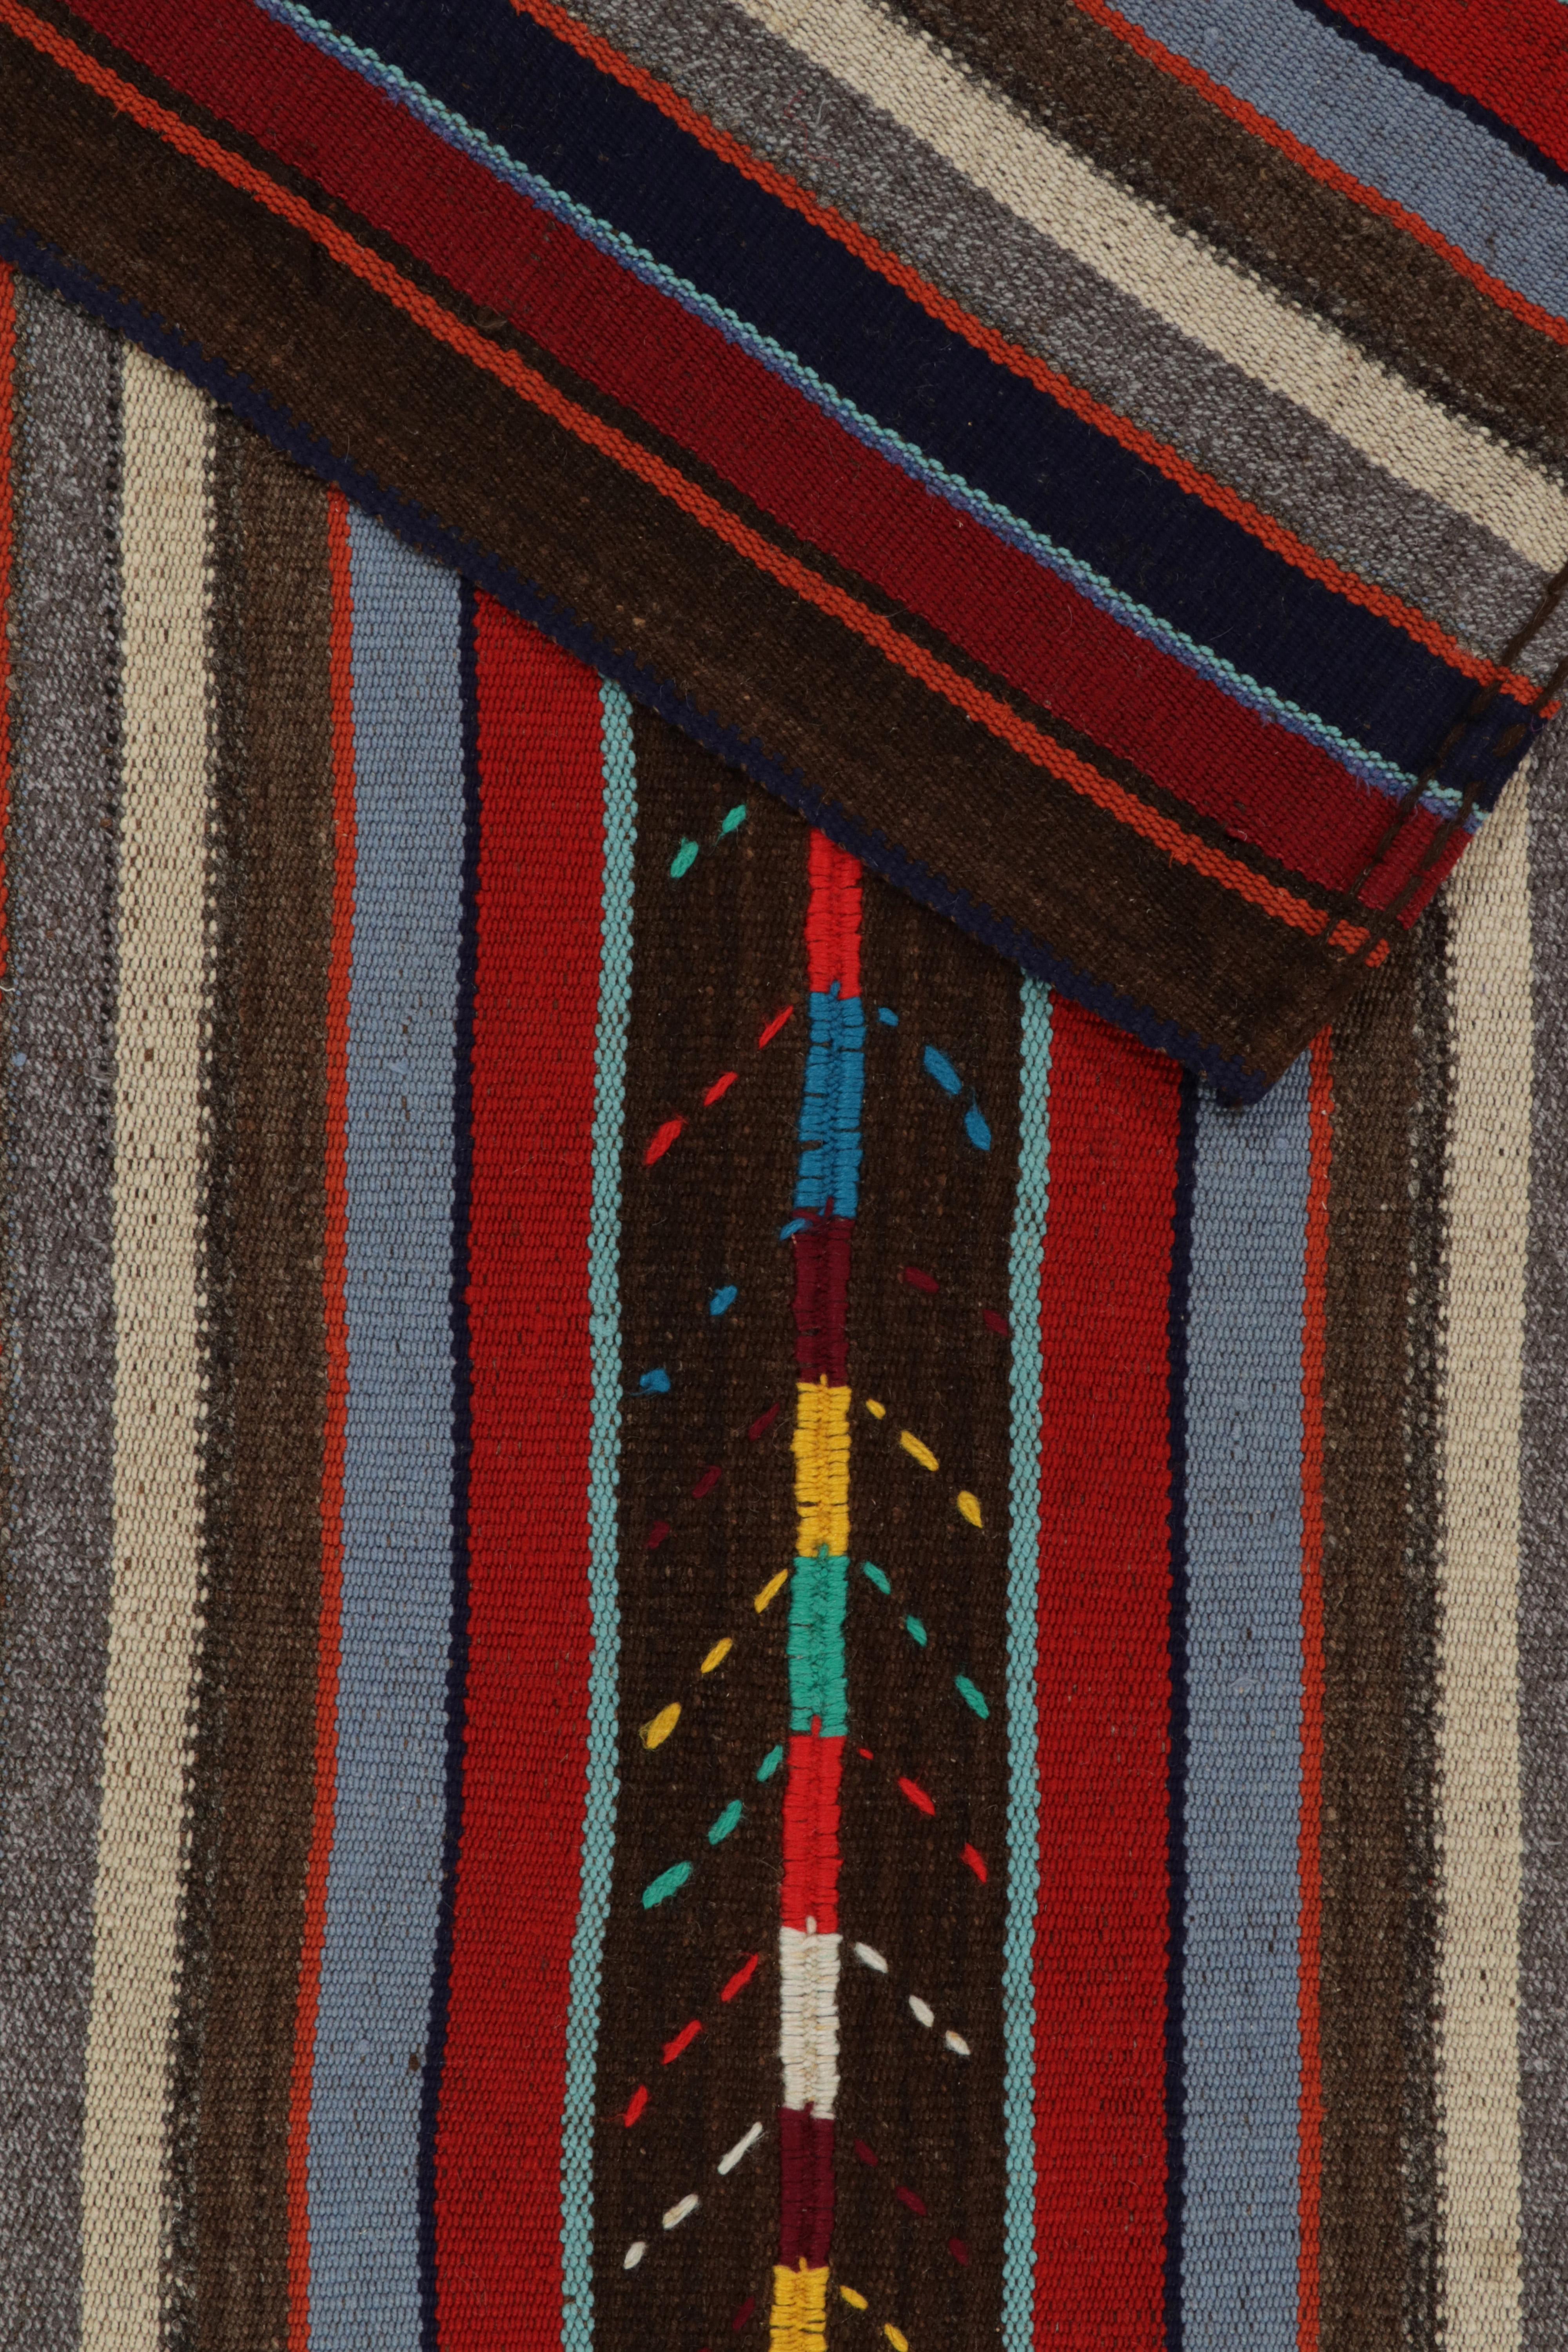 1950s Vintage Chaput Kilim Rug in Brown, Red, Multicolor Stripes by Rug & Kilim In Good Condition For Sale In Long Island City, NY